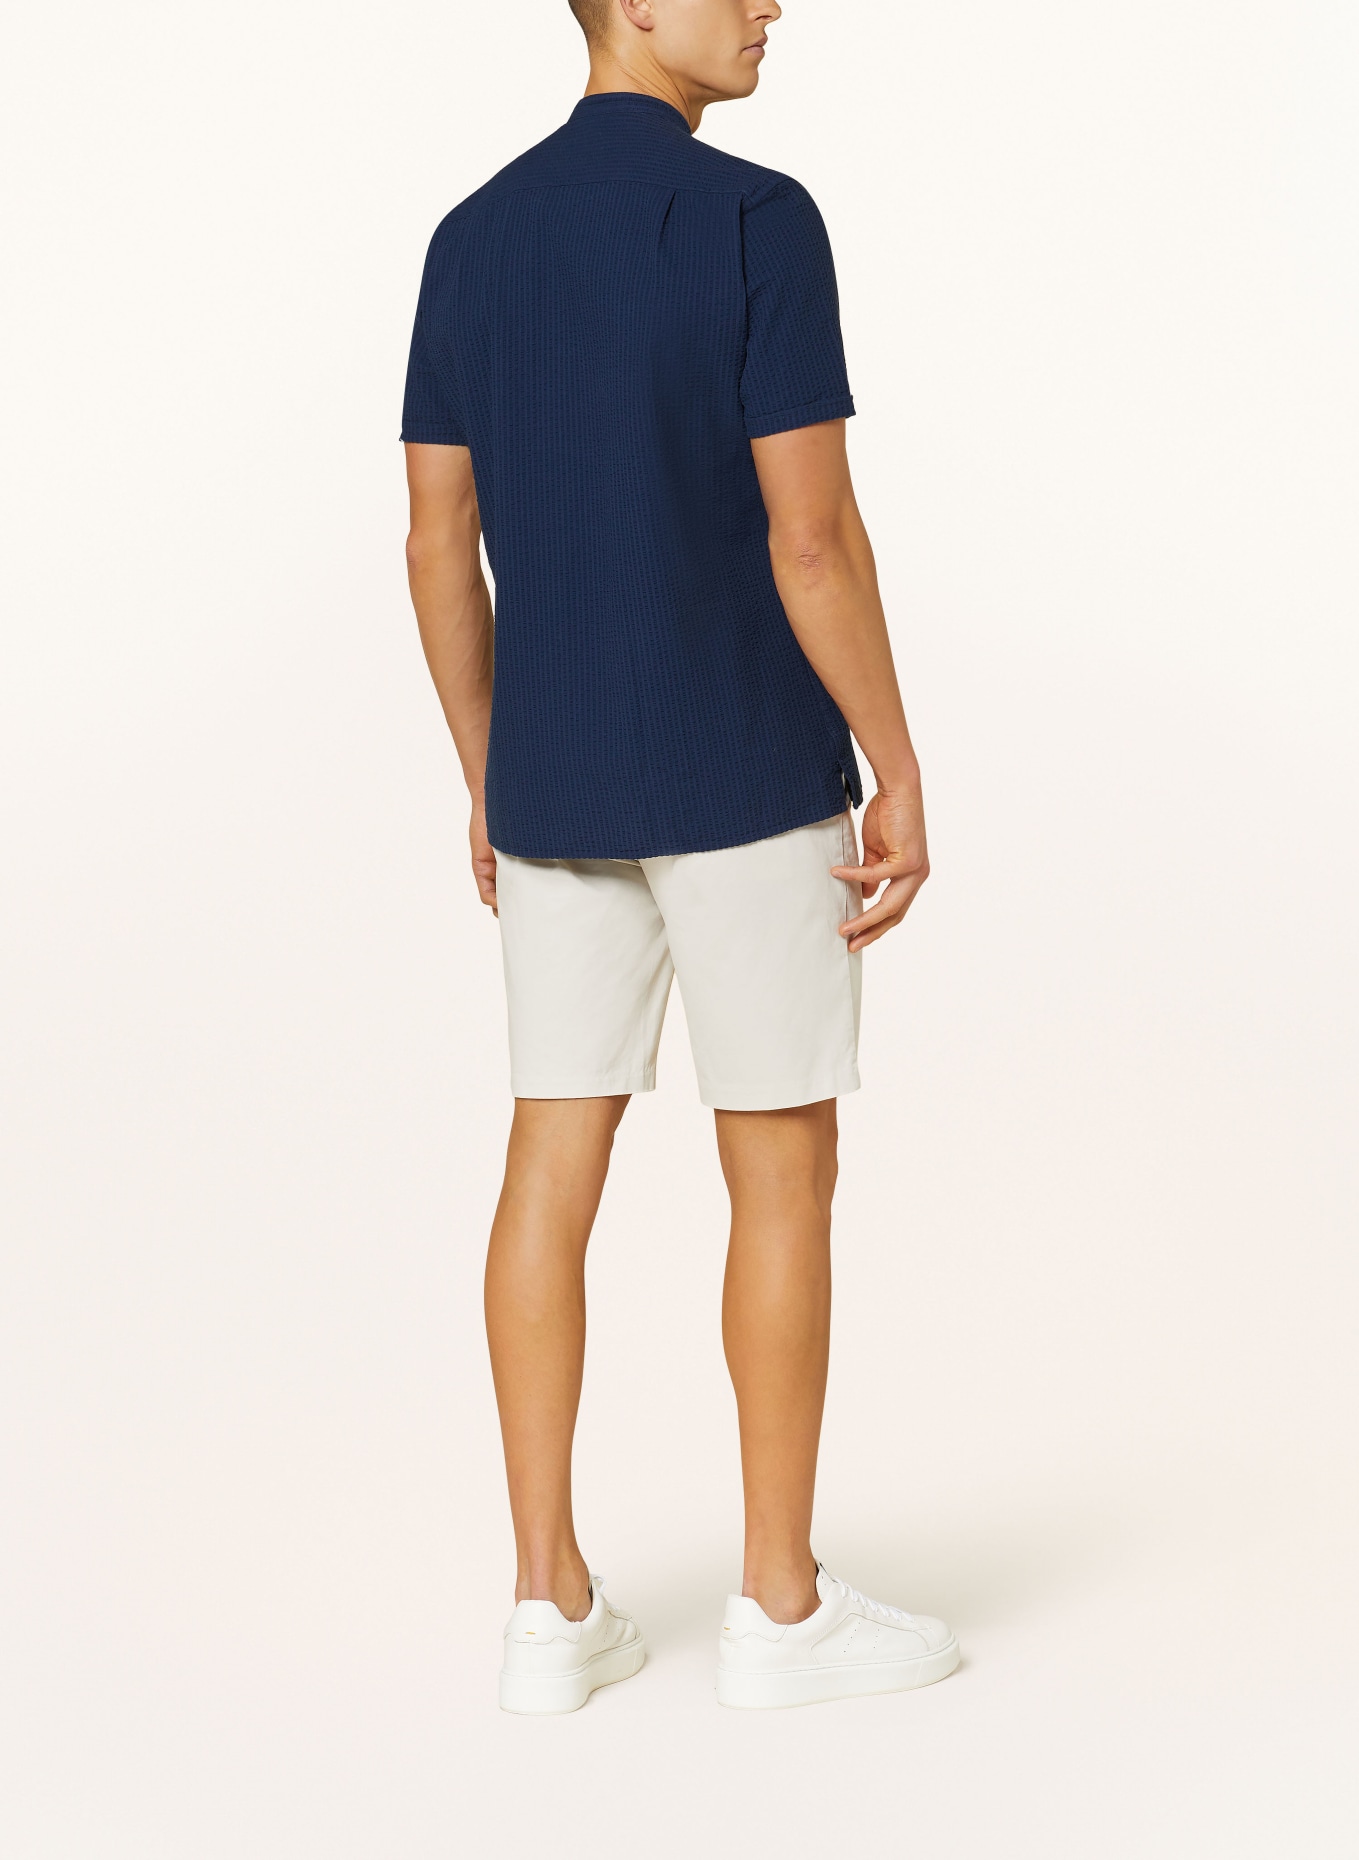 STROKESMAN'S Short sleeve shirt regular fit with stand-up collar, Color: DARK BLUE (Image 3)